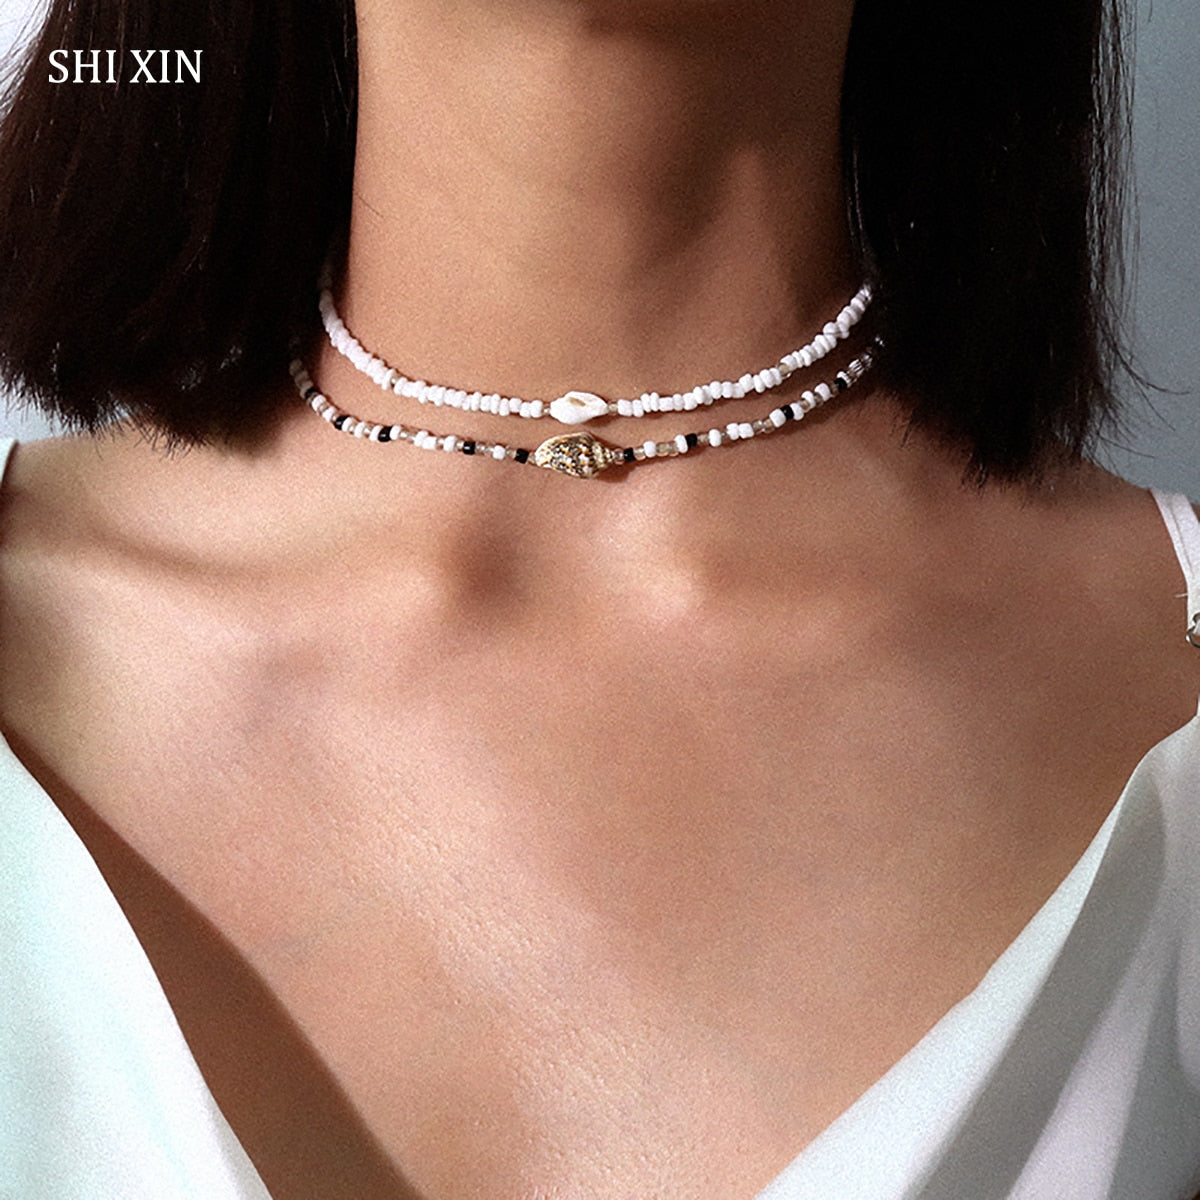 SHIXIN Separable 2 Layered White/Black Beads Necklaces Korean Small Beaded Conch Shell Choker Necklace for Women Fashion Collar - Charlie Dolly